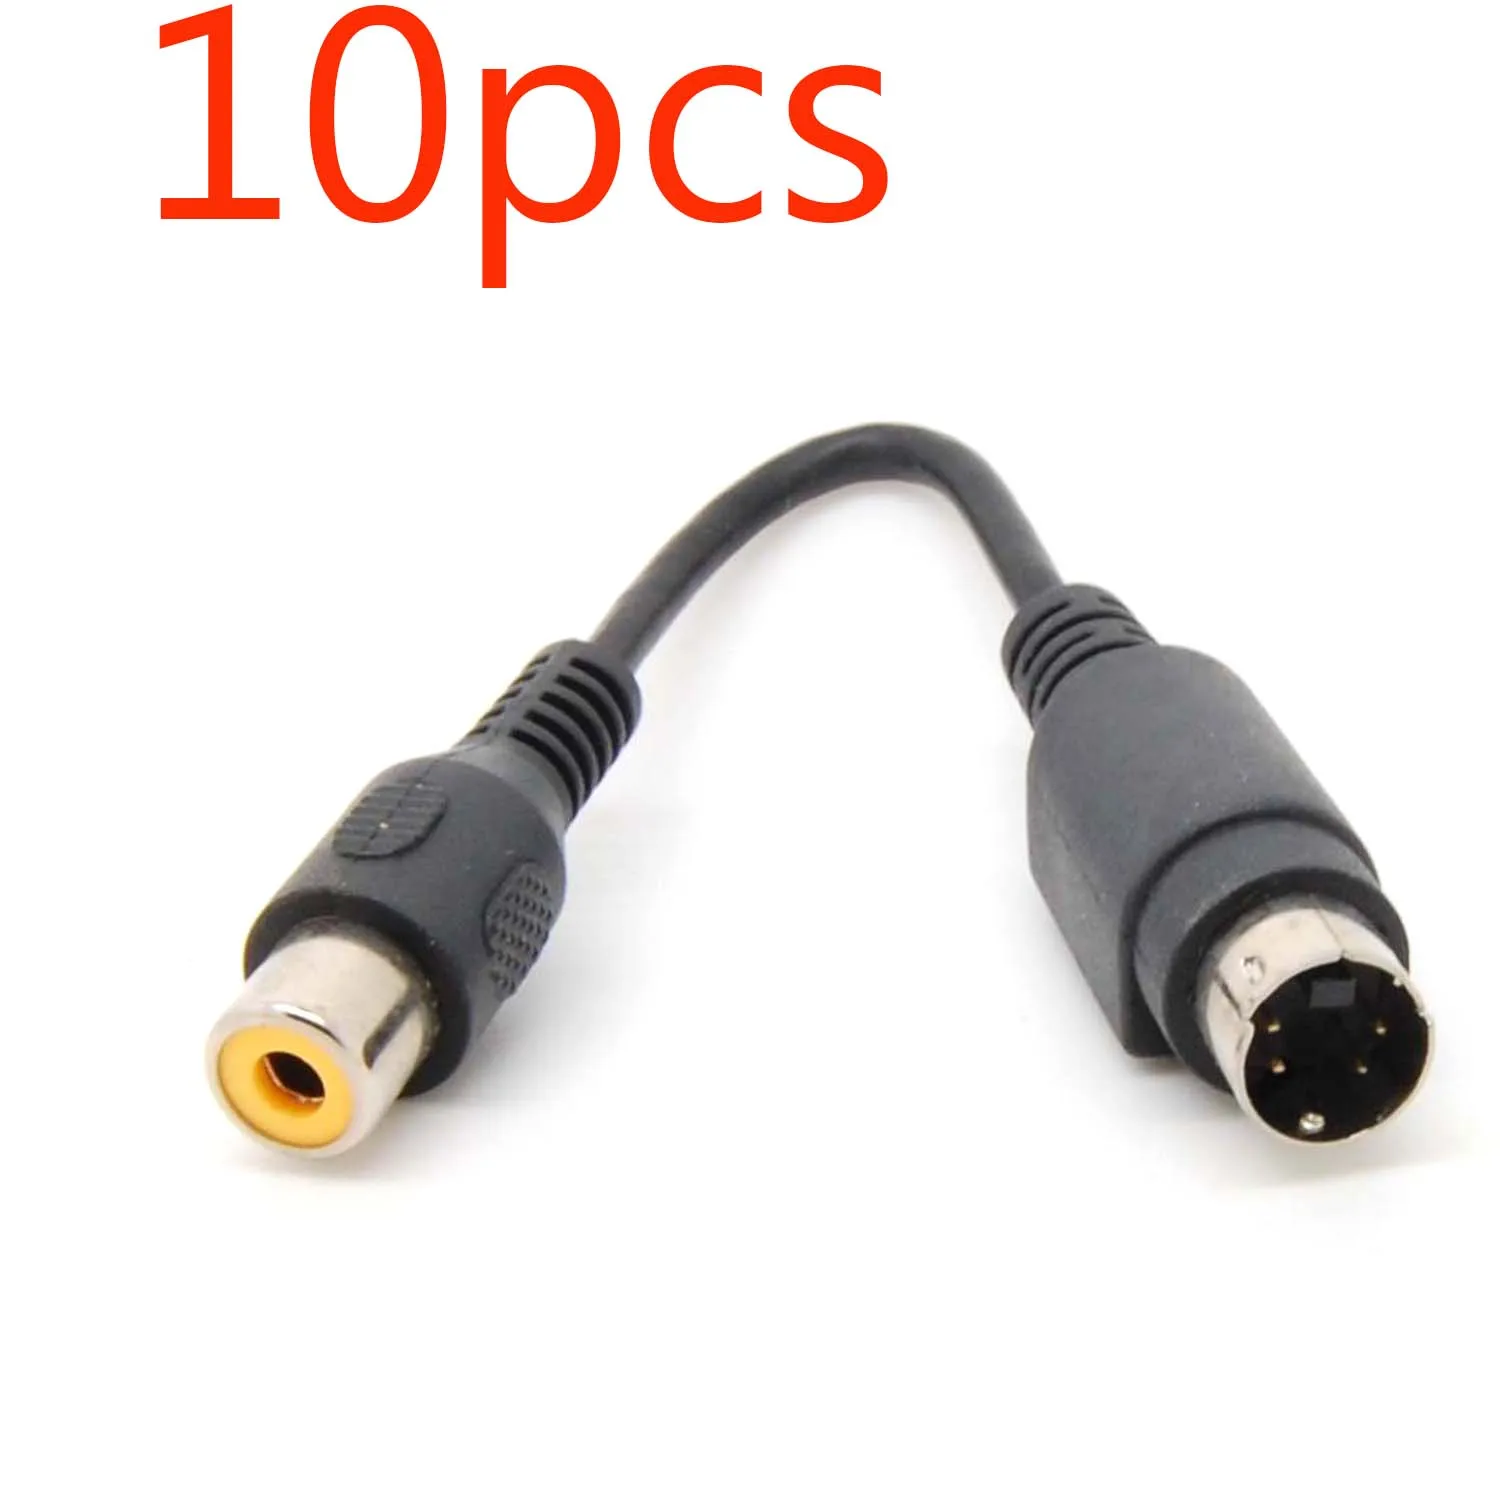 S-Video 4-Pin to Composite Video RCA AV Converter Cable c10 new 